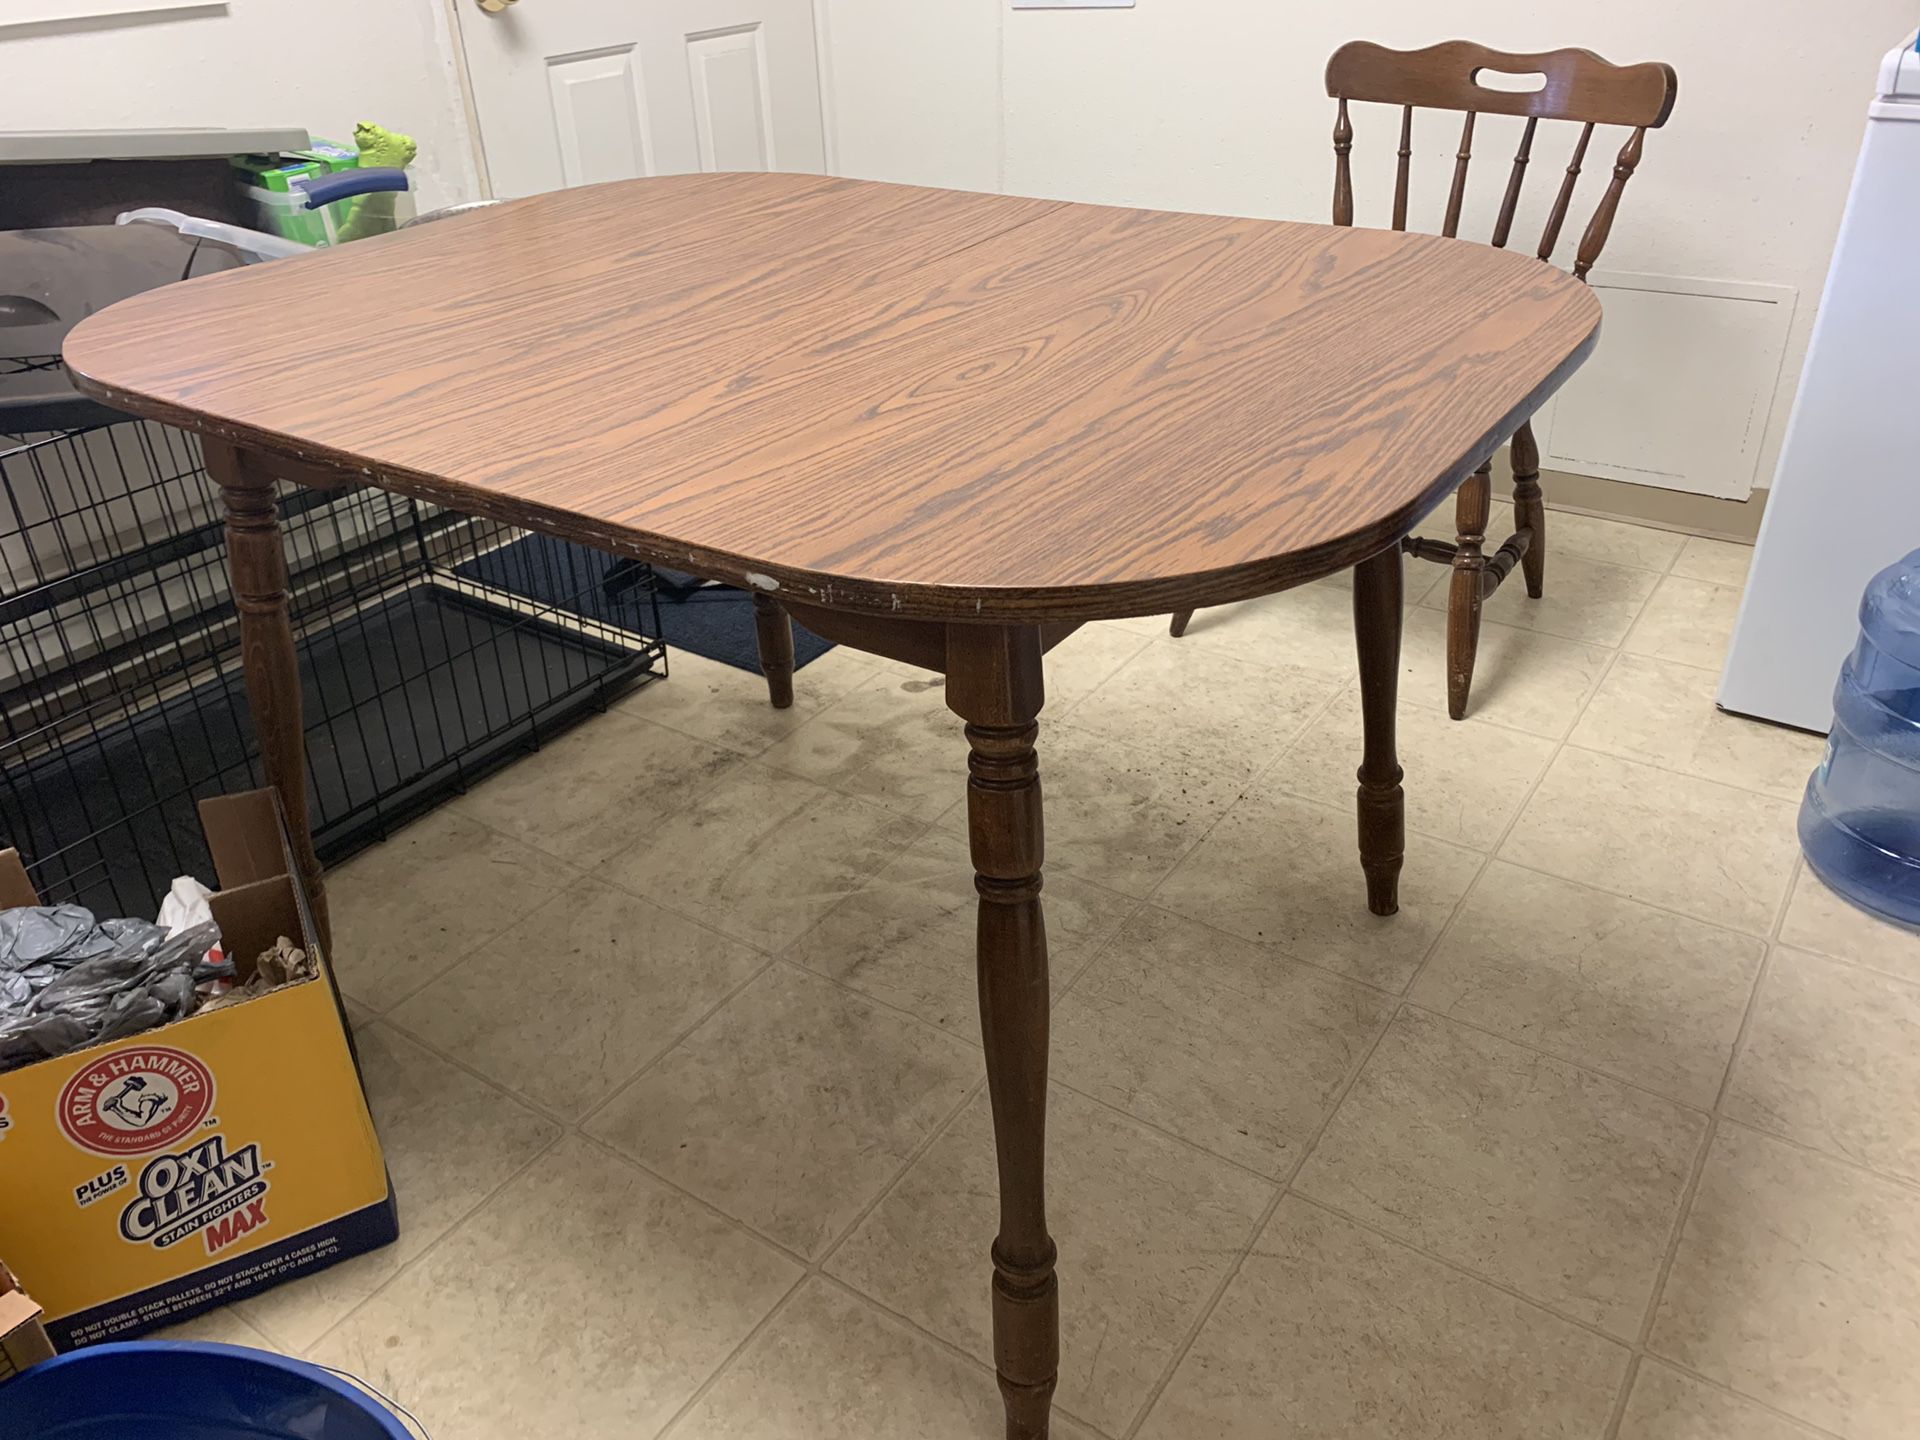 Kitchen table with 2 chairs